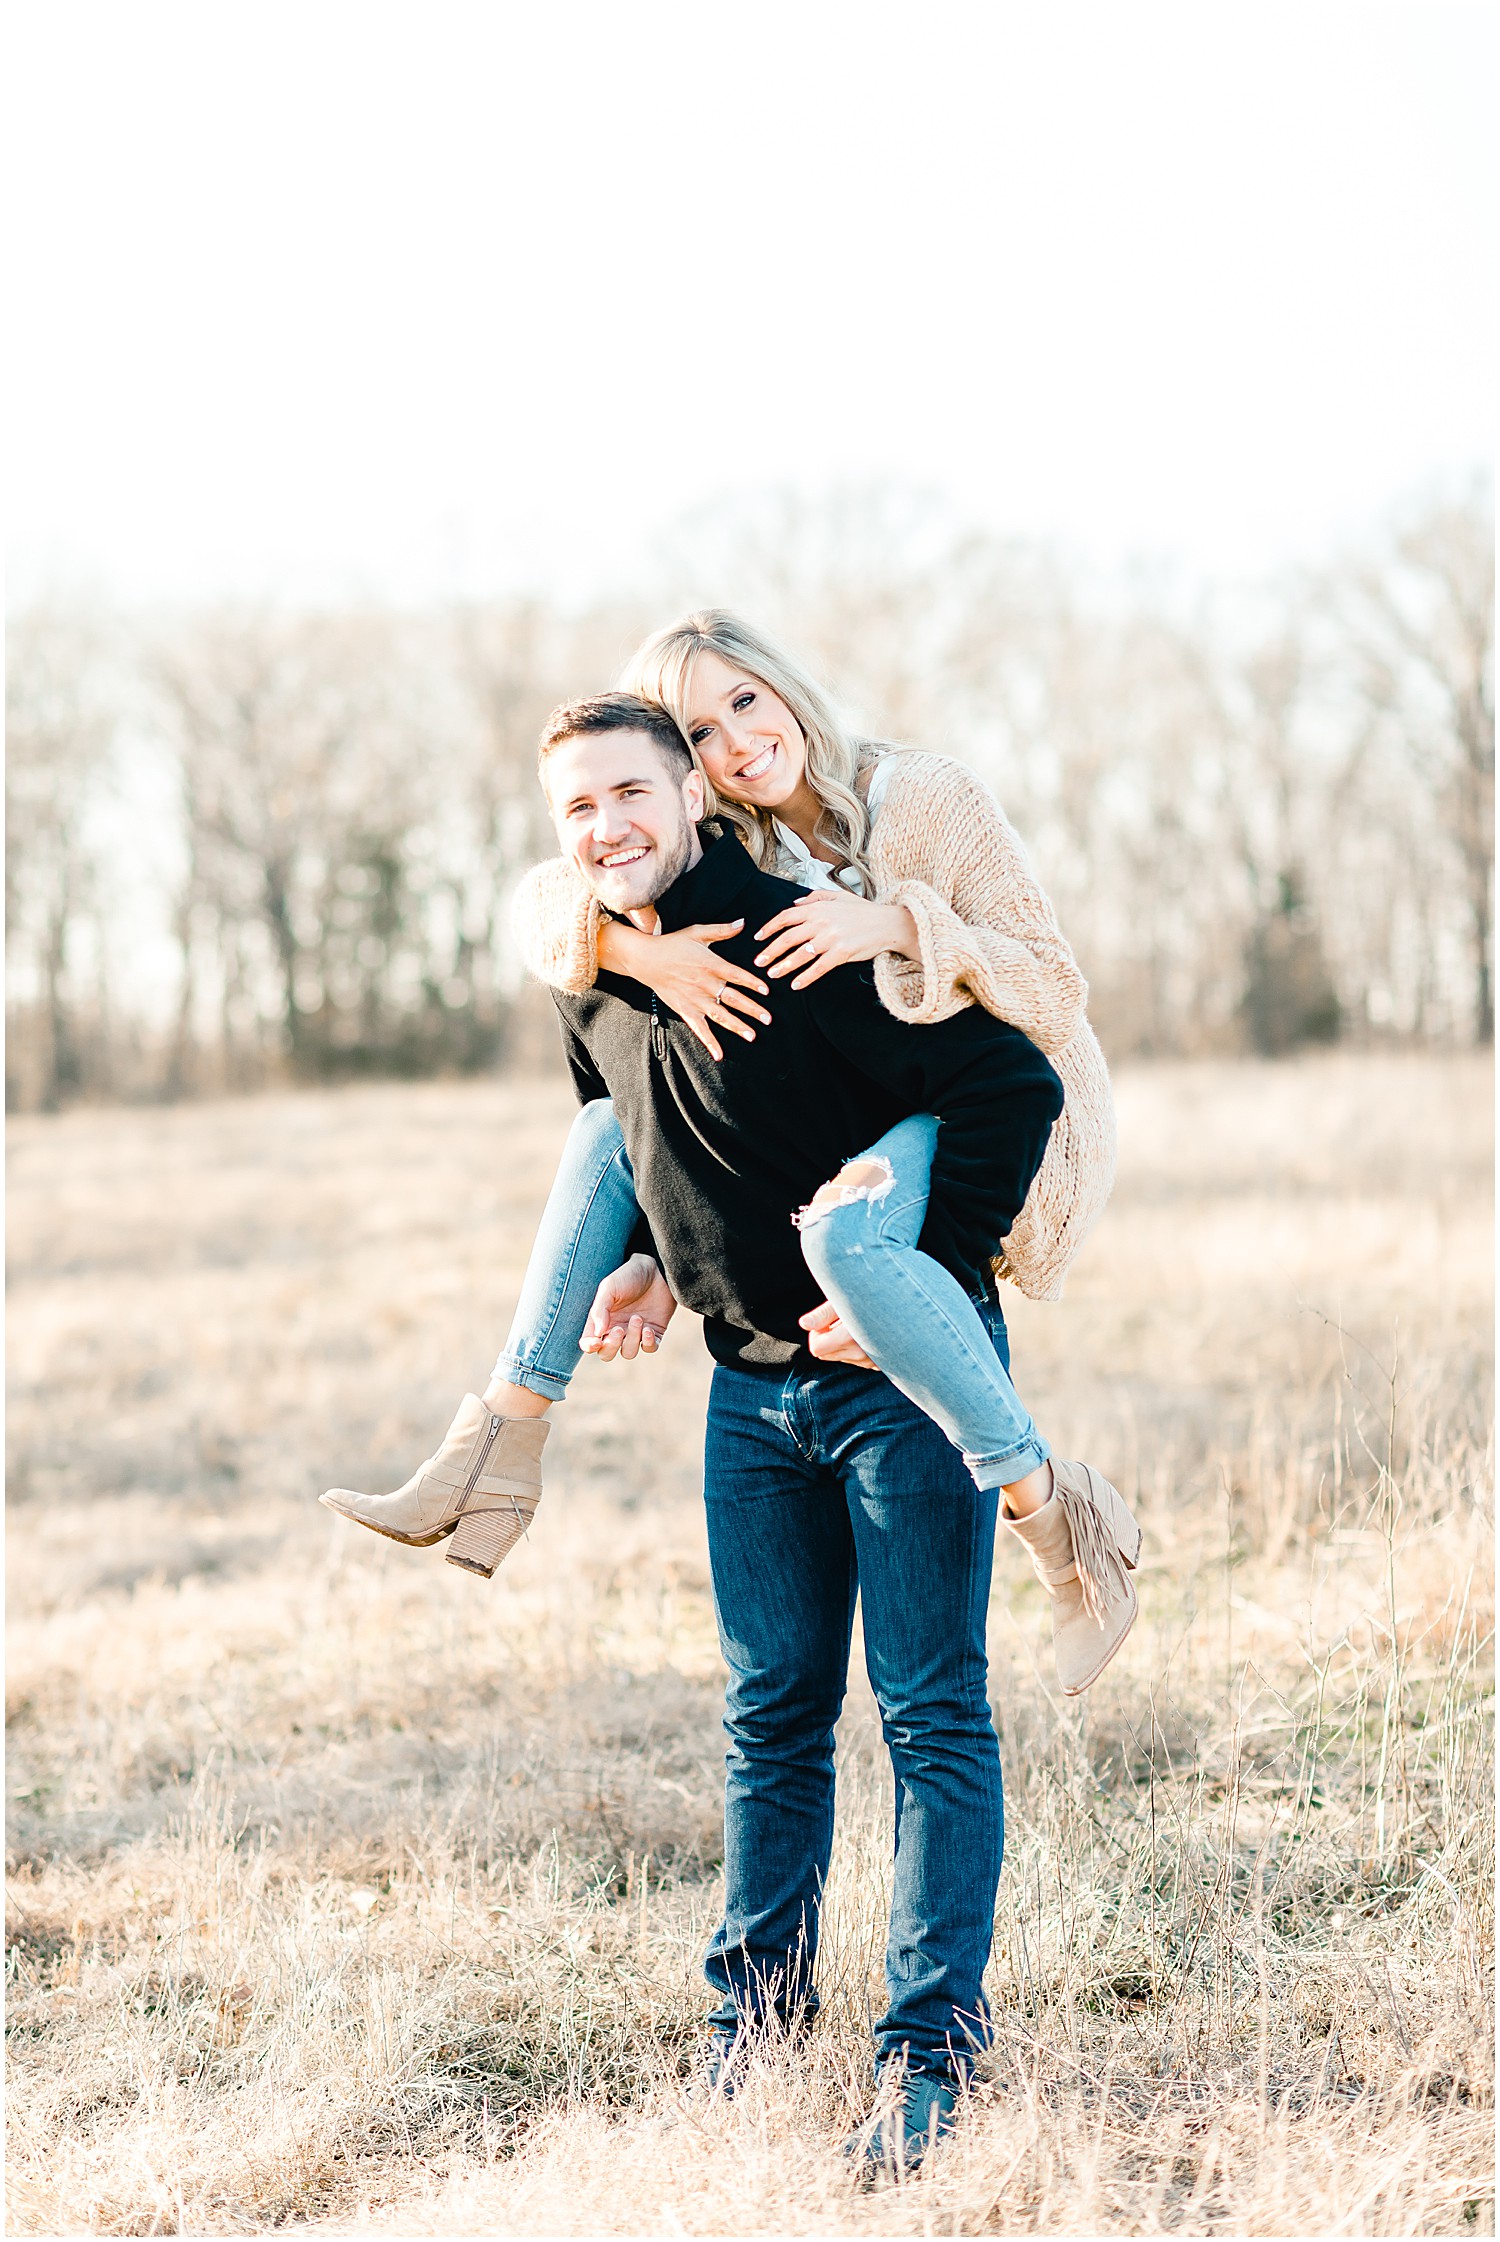 engaged couple piggy back ride in field